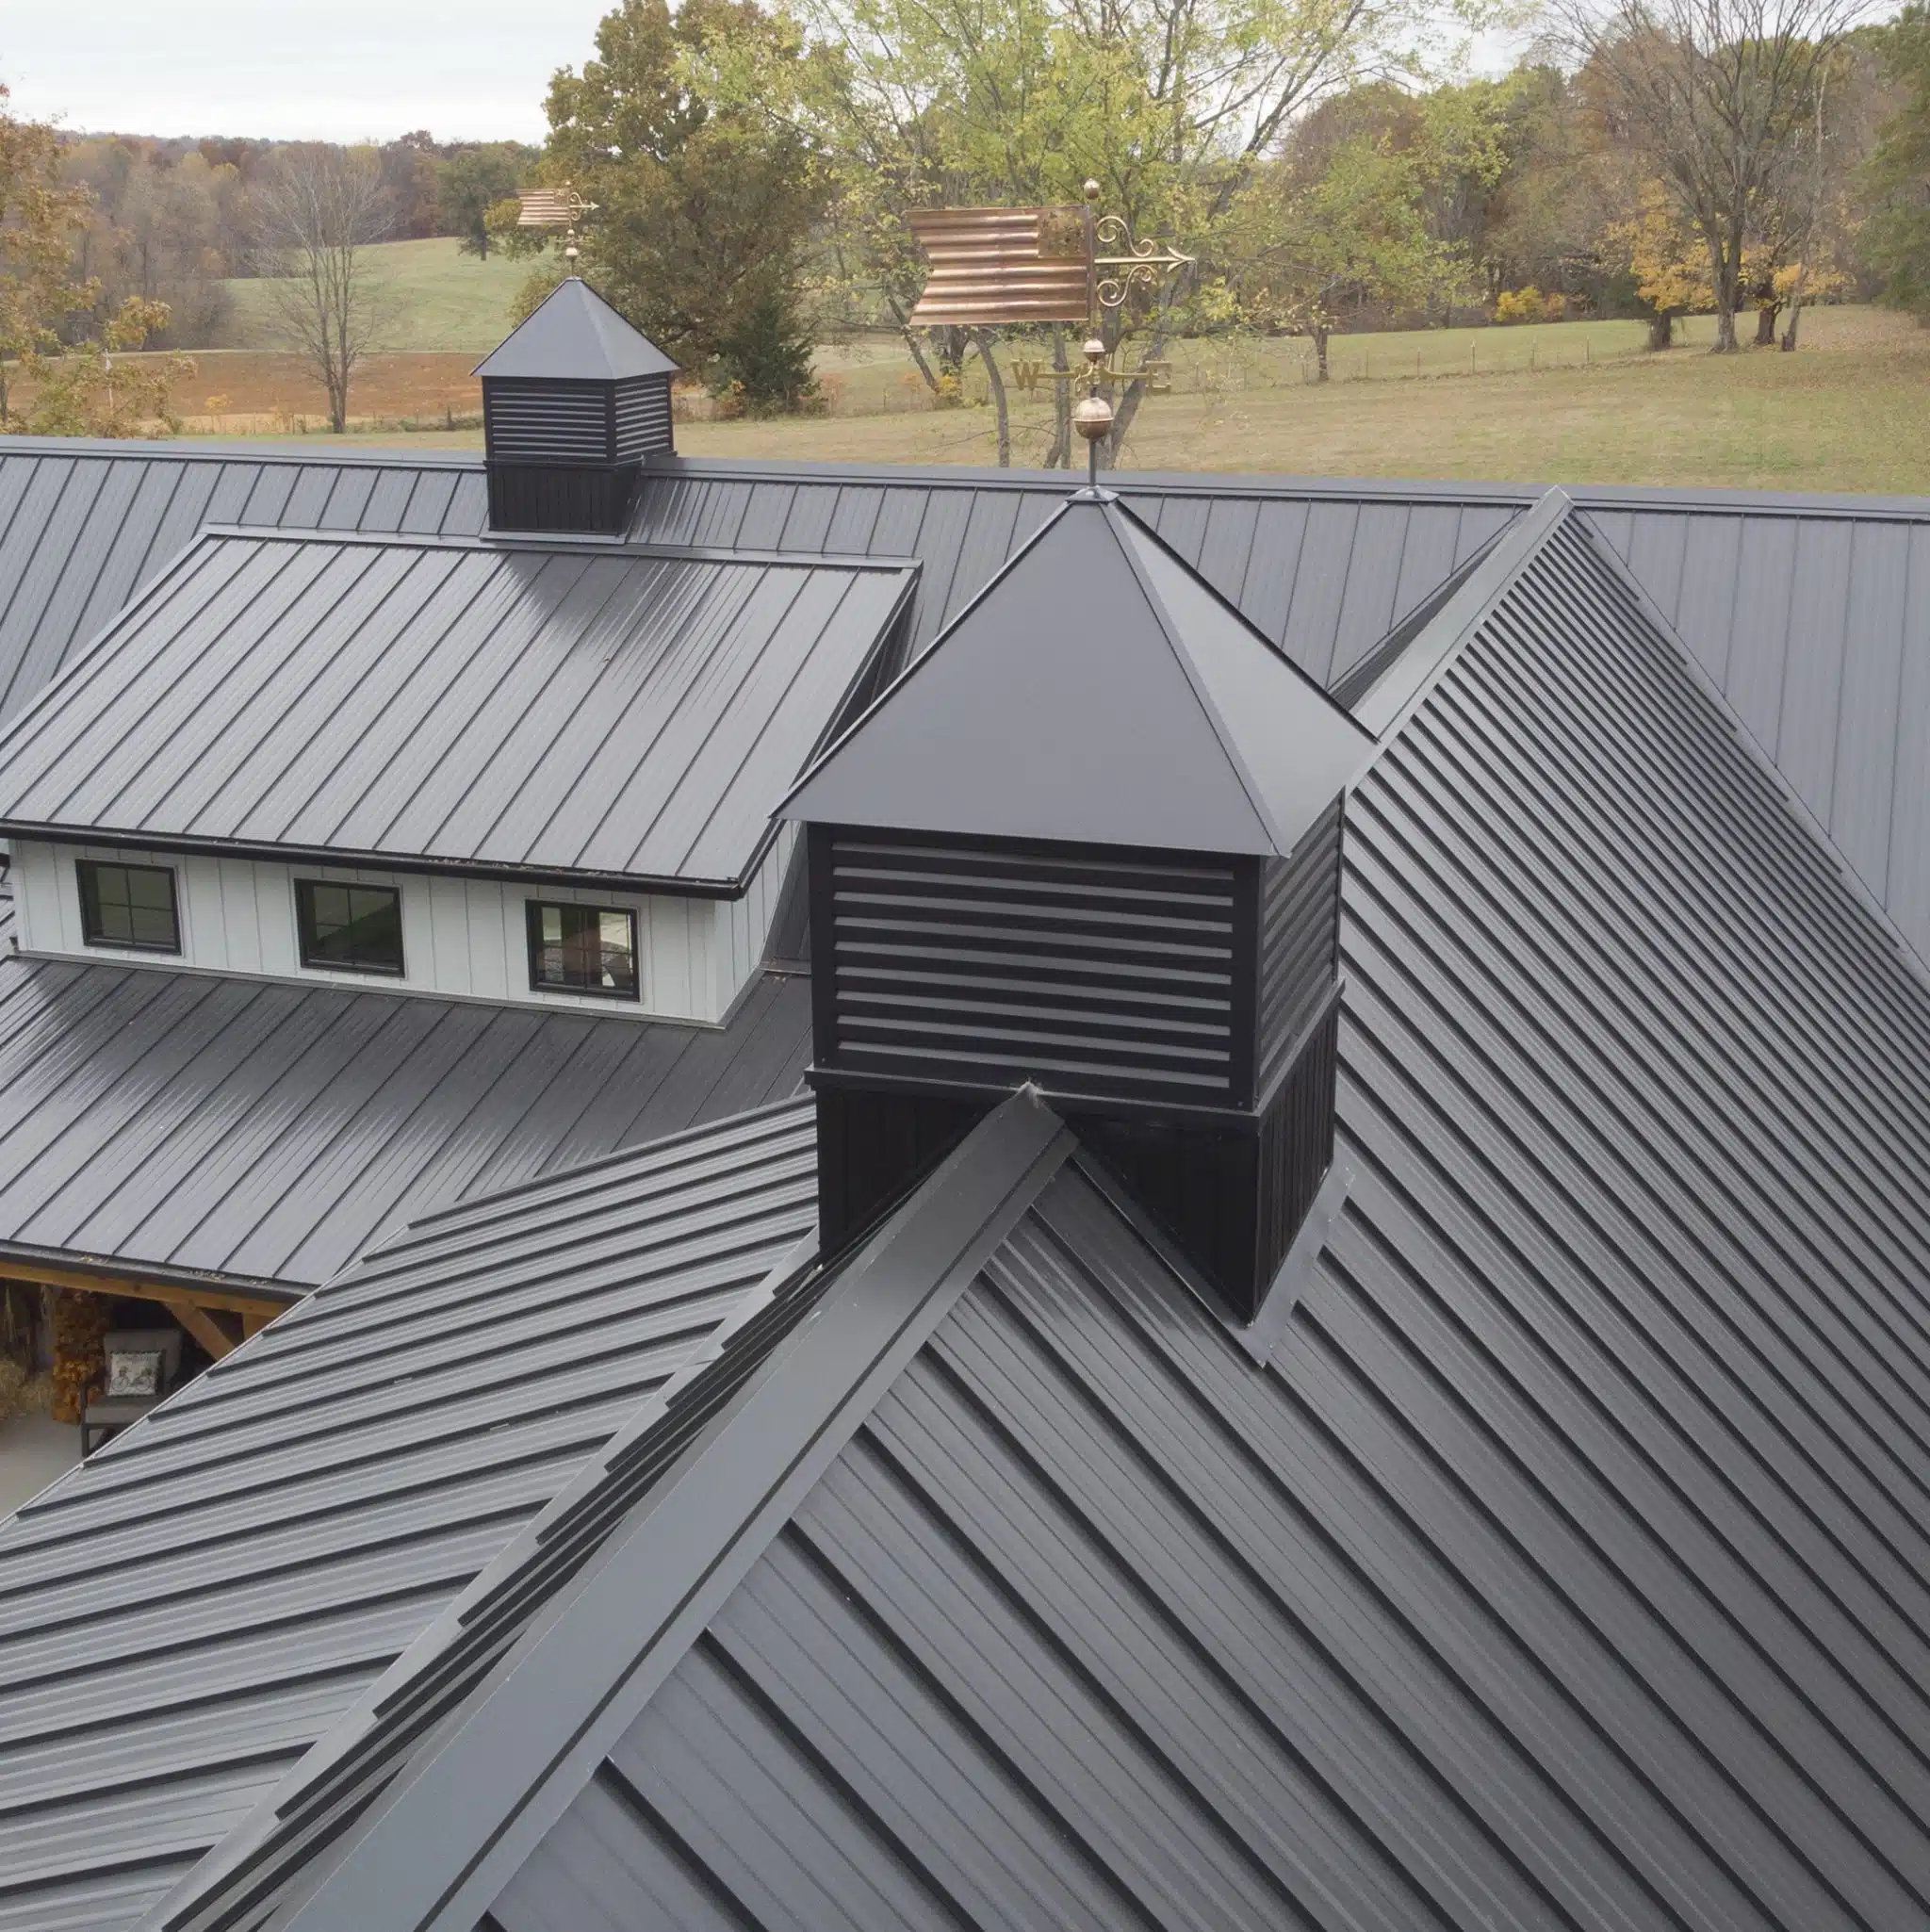 Residential Home with Horizon-Loc Roof in Matte Black